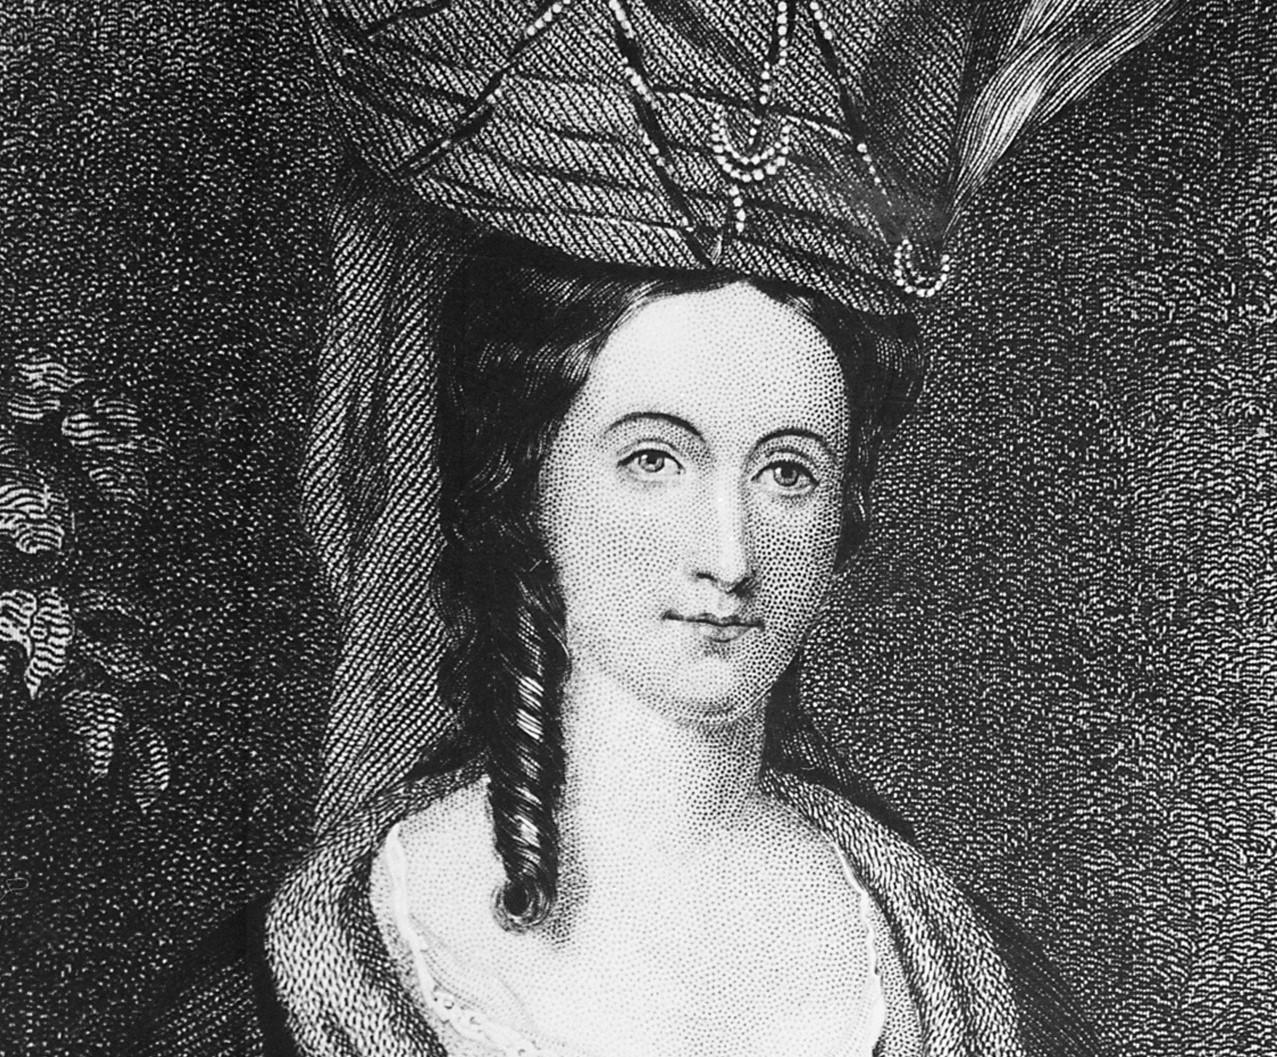 Mary Morris, wife of Declaration & Constitution signer Robert Morris, fled her home with her four young children as the British approached Philadelphia.